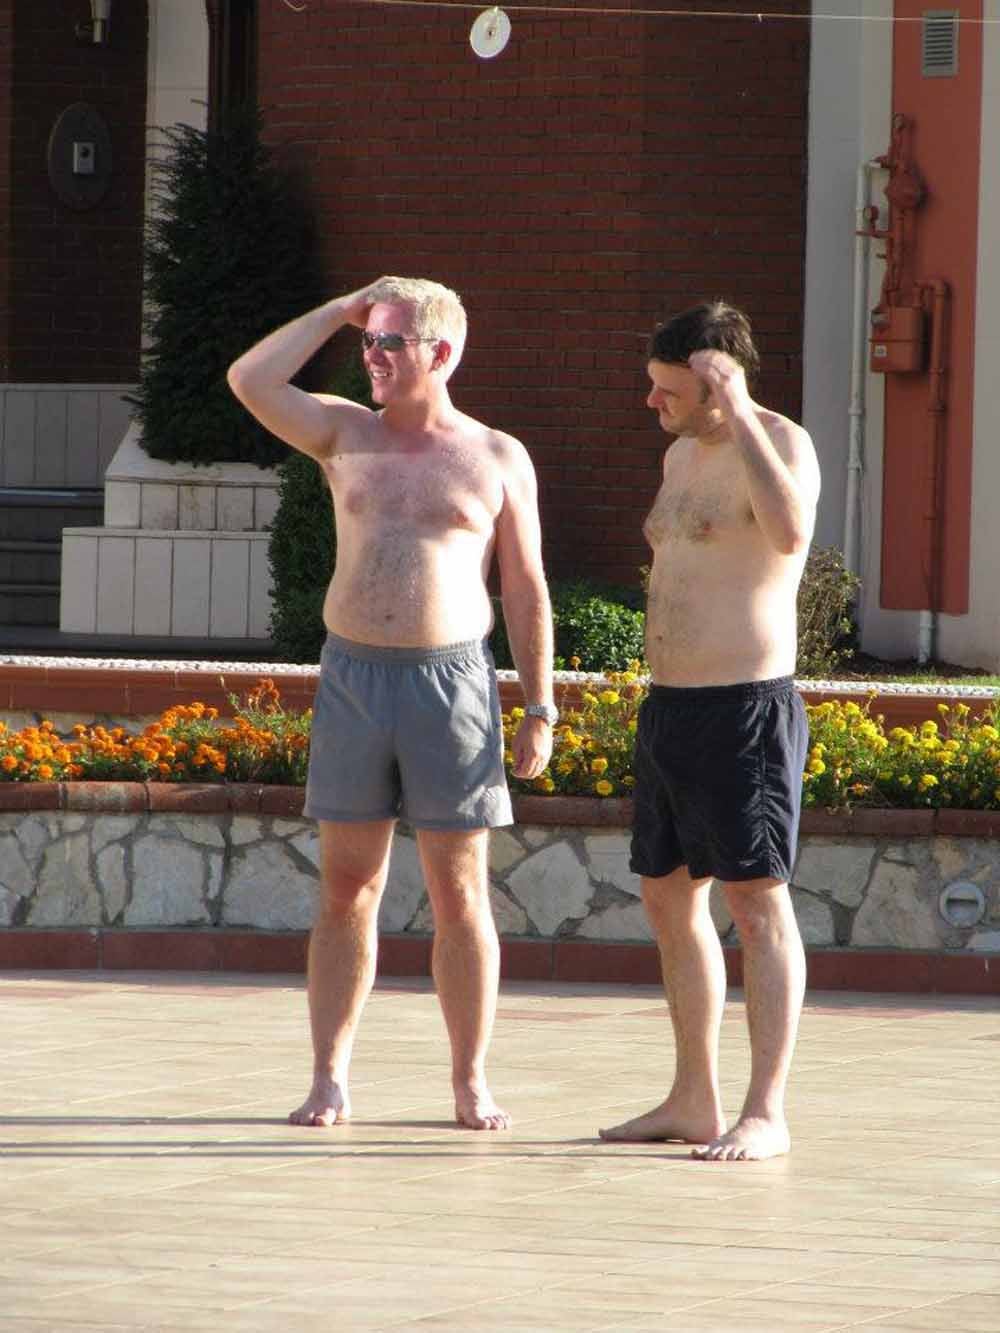 Mike decided to lose weight after seeing a photo of himself shirtless on holiday. (Collect/PA Real Life)